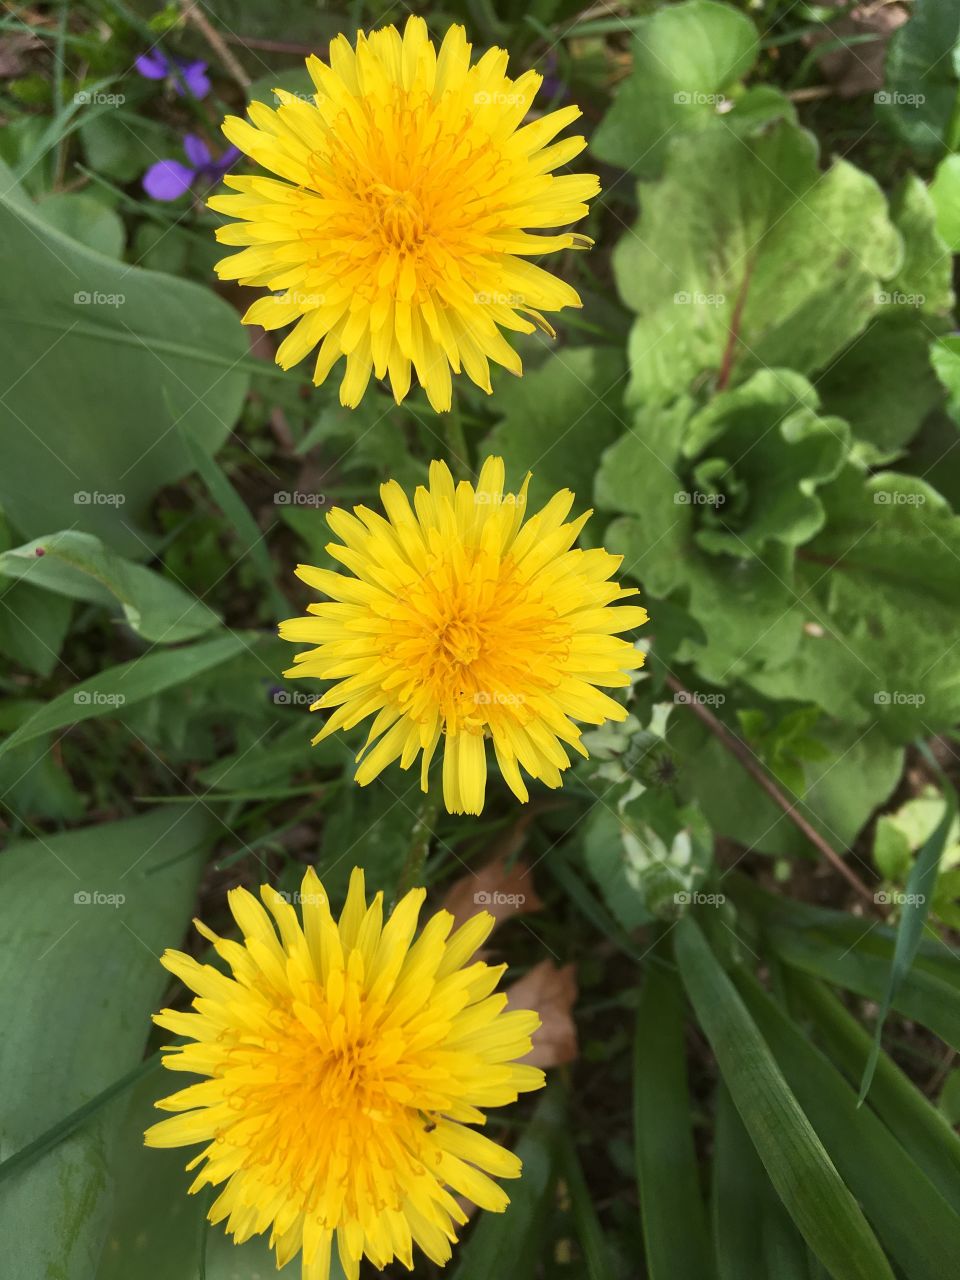 Bright yellow dandelions blooming in spring